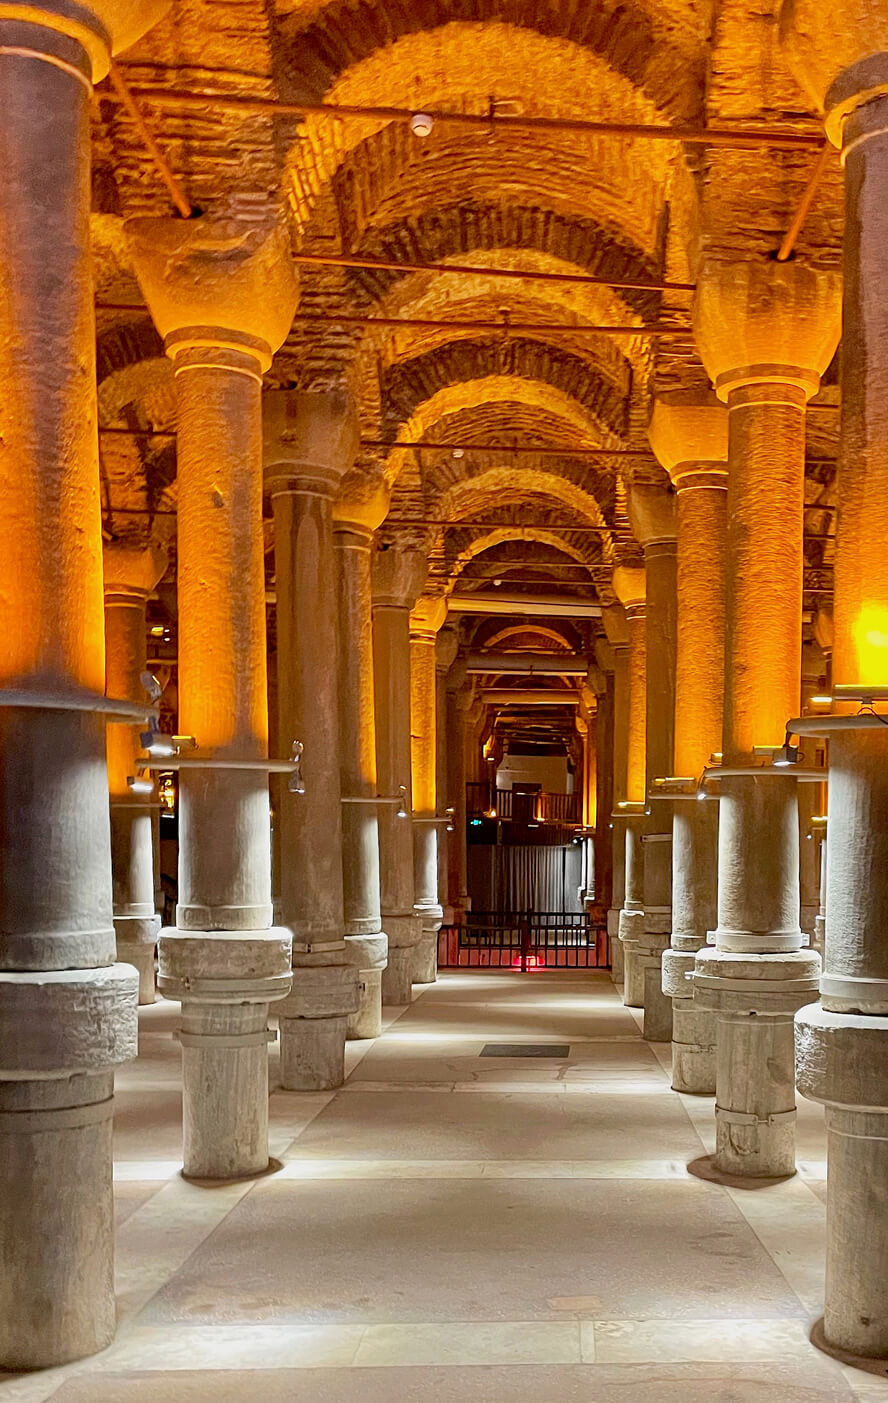 Entrance to Cistern of Philoxenos. Hagia Sophia – Church, Mosque or Museum?